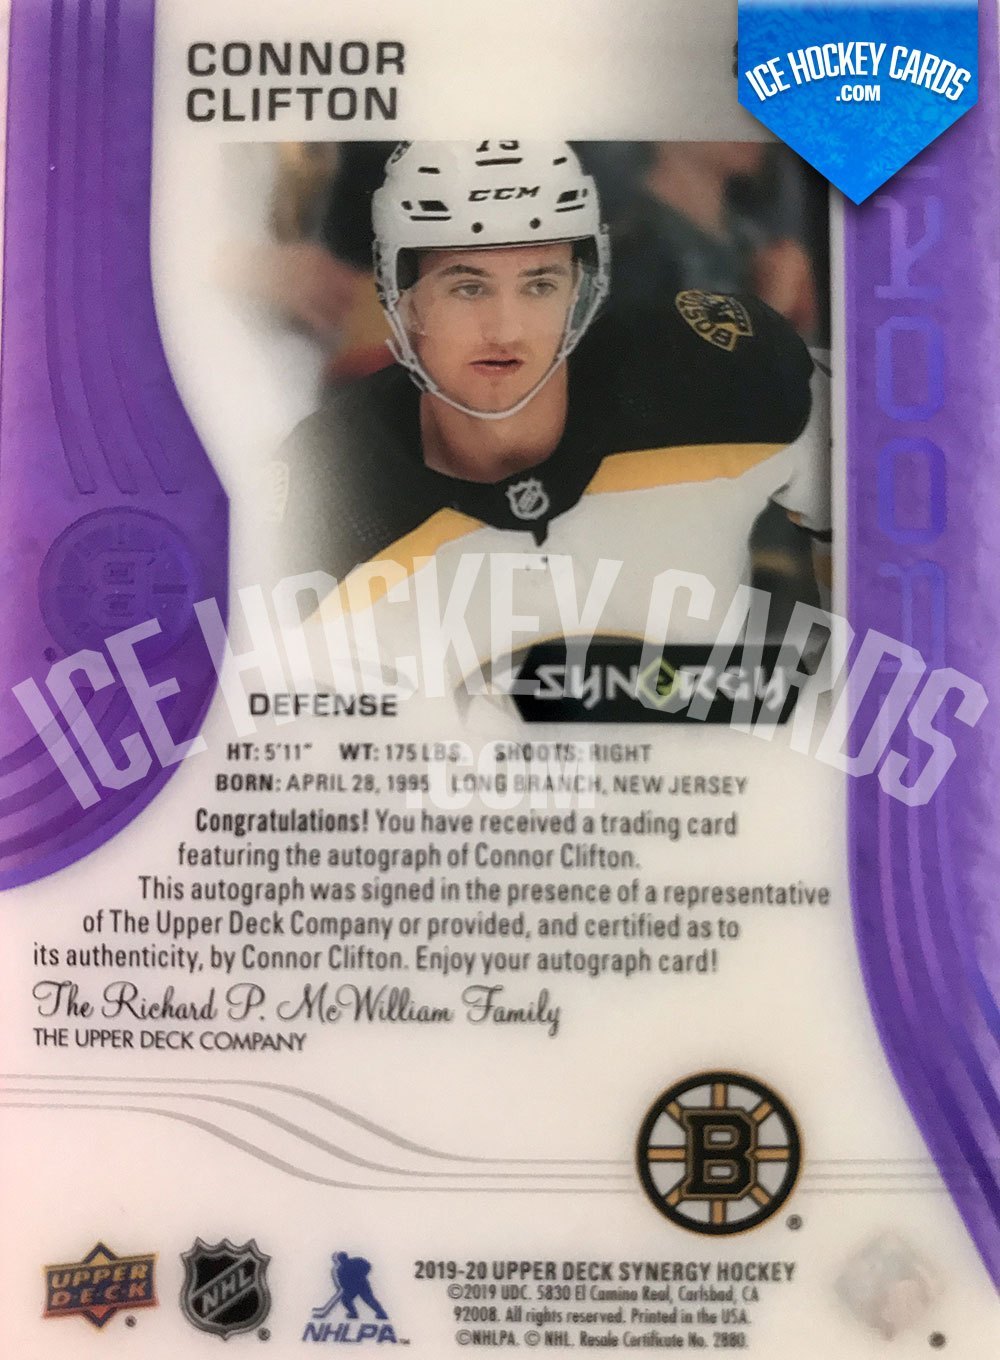 Upper Deck - Synergy 2019-20 - Connor Clifton Autographed Rookie RC # to 75 back